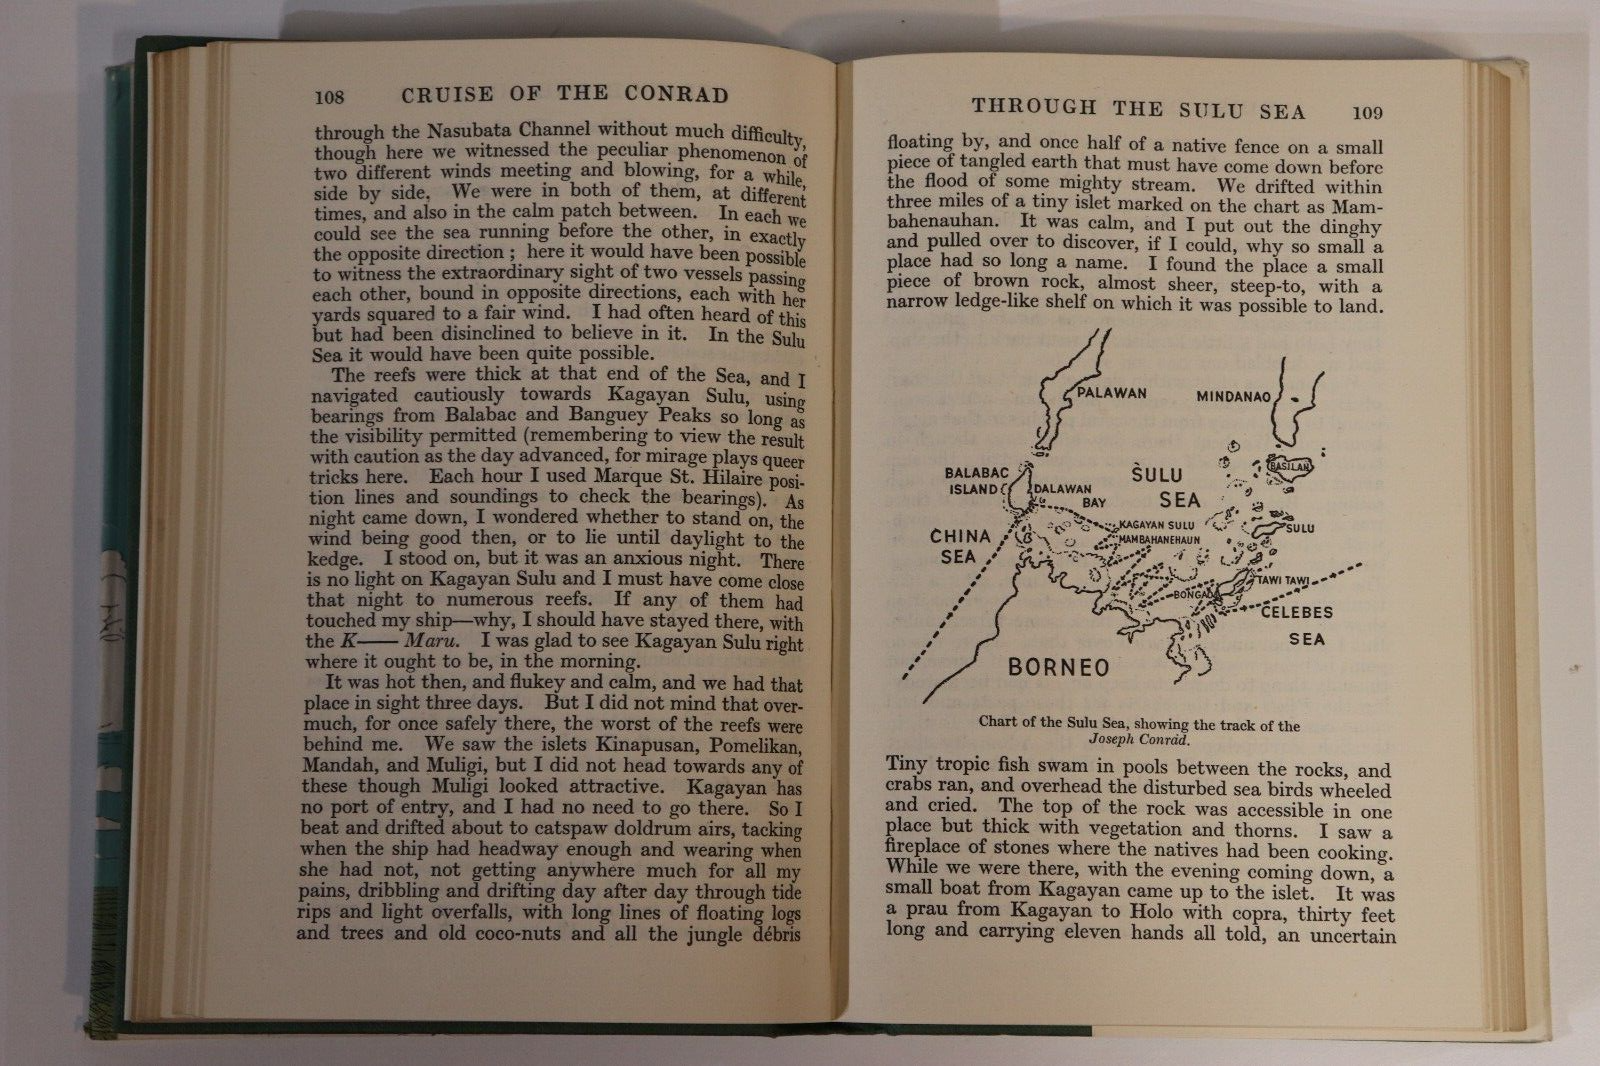 1952 Cruise Of The Conrad by Allan Villiers - Vintage Maritime History Book